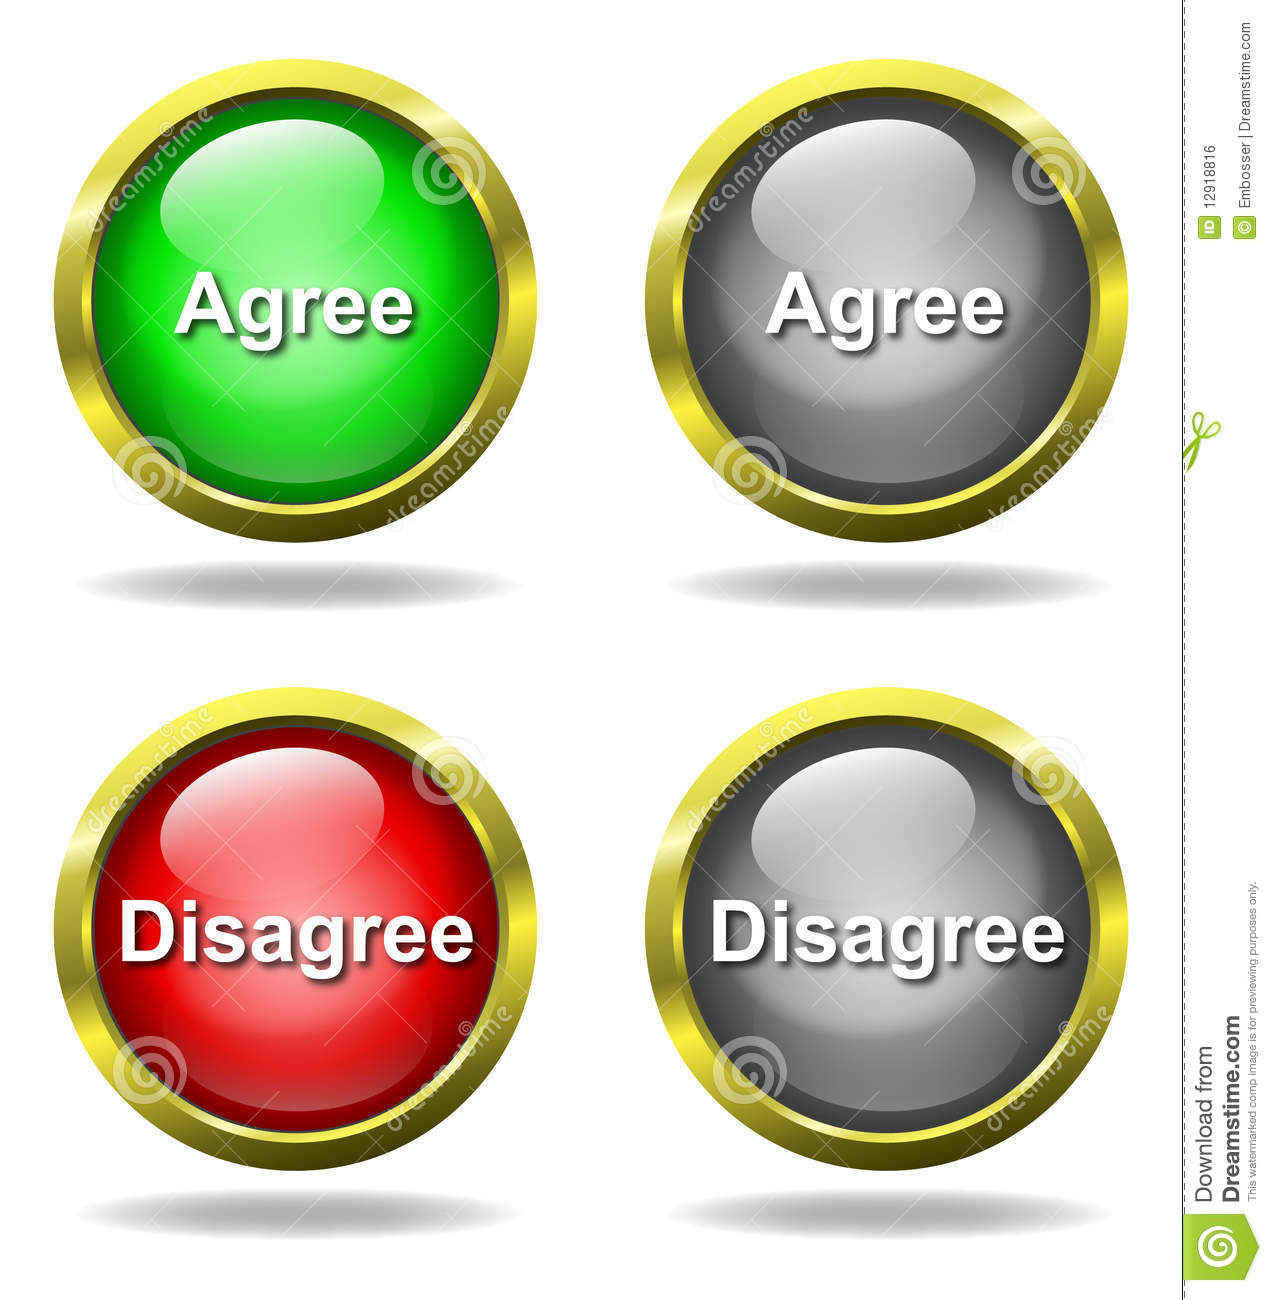 Set Of Glass Agree   Disagree Buttons Royalty Free Stock Image   Image